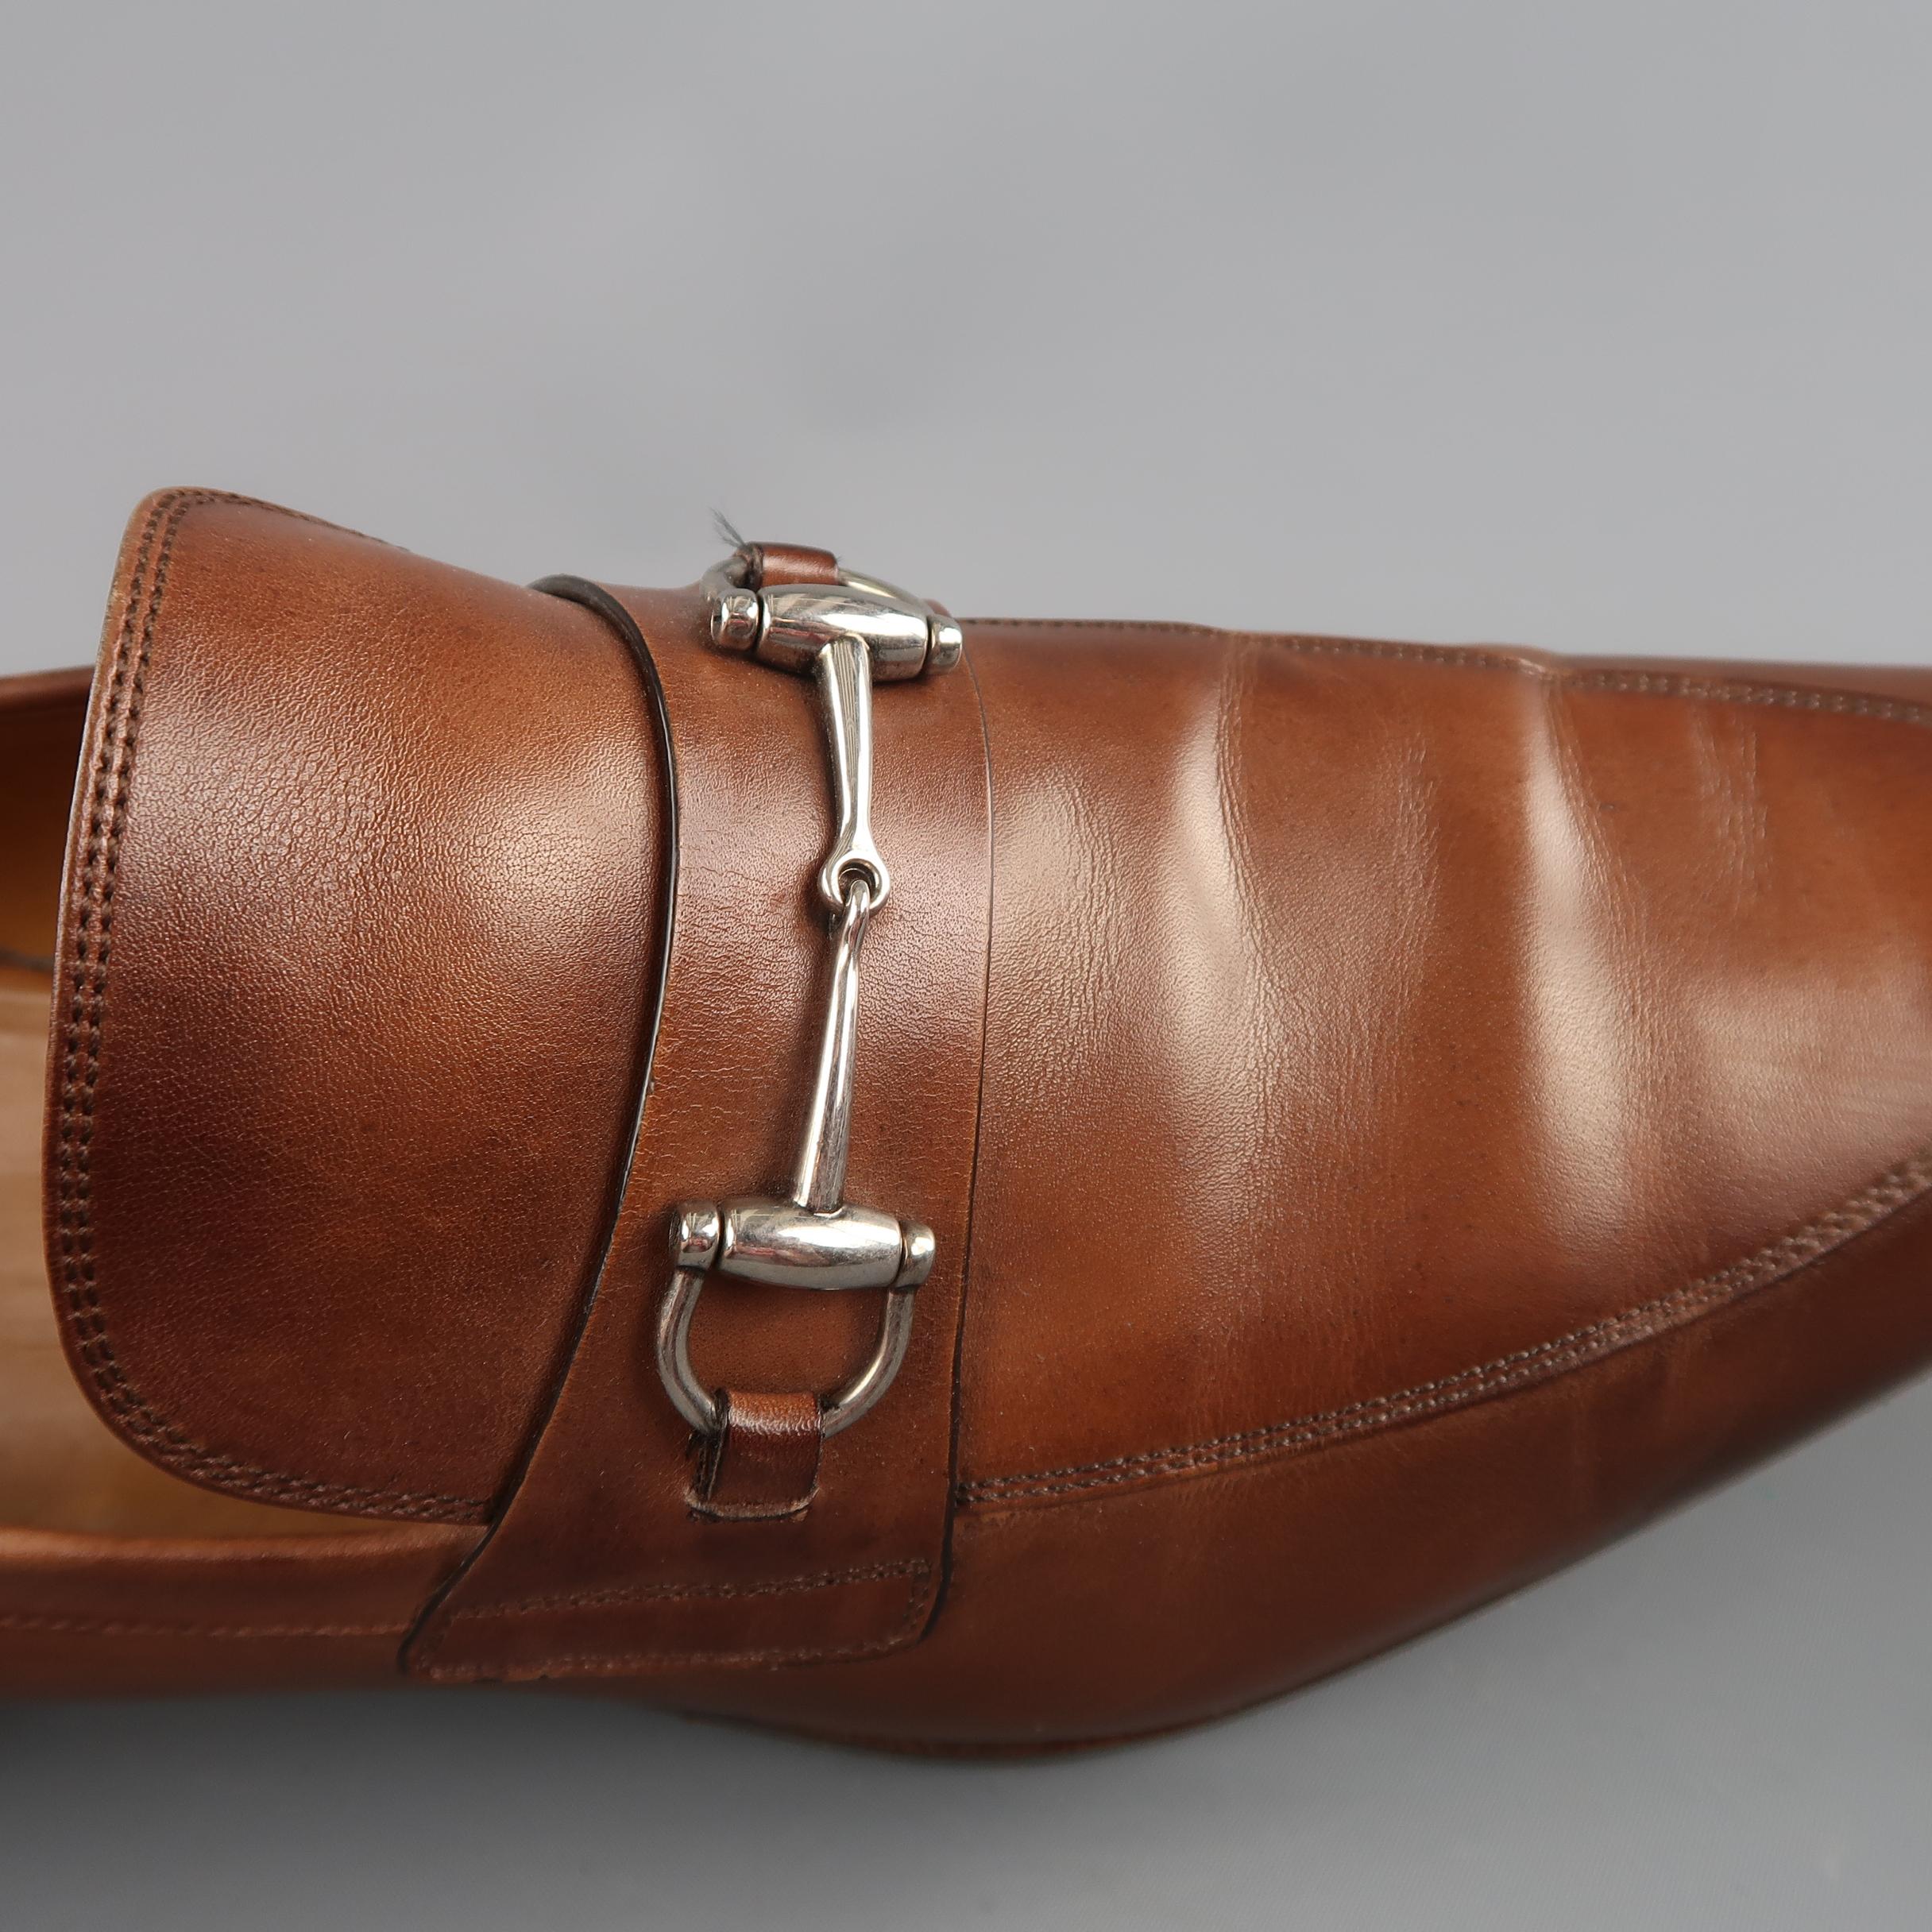 GUCCI loafers come in antique tan brown leather with a subtle ombre. pointed apron toe, and strap with silver tone horsebit hardware. Made in Italy.
 
Good Pre-Owned Condition.
Marked: UK 10
 
Outsole: 12.5 x 4 in.